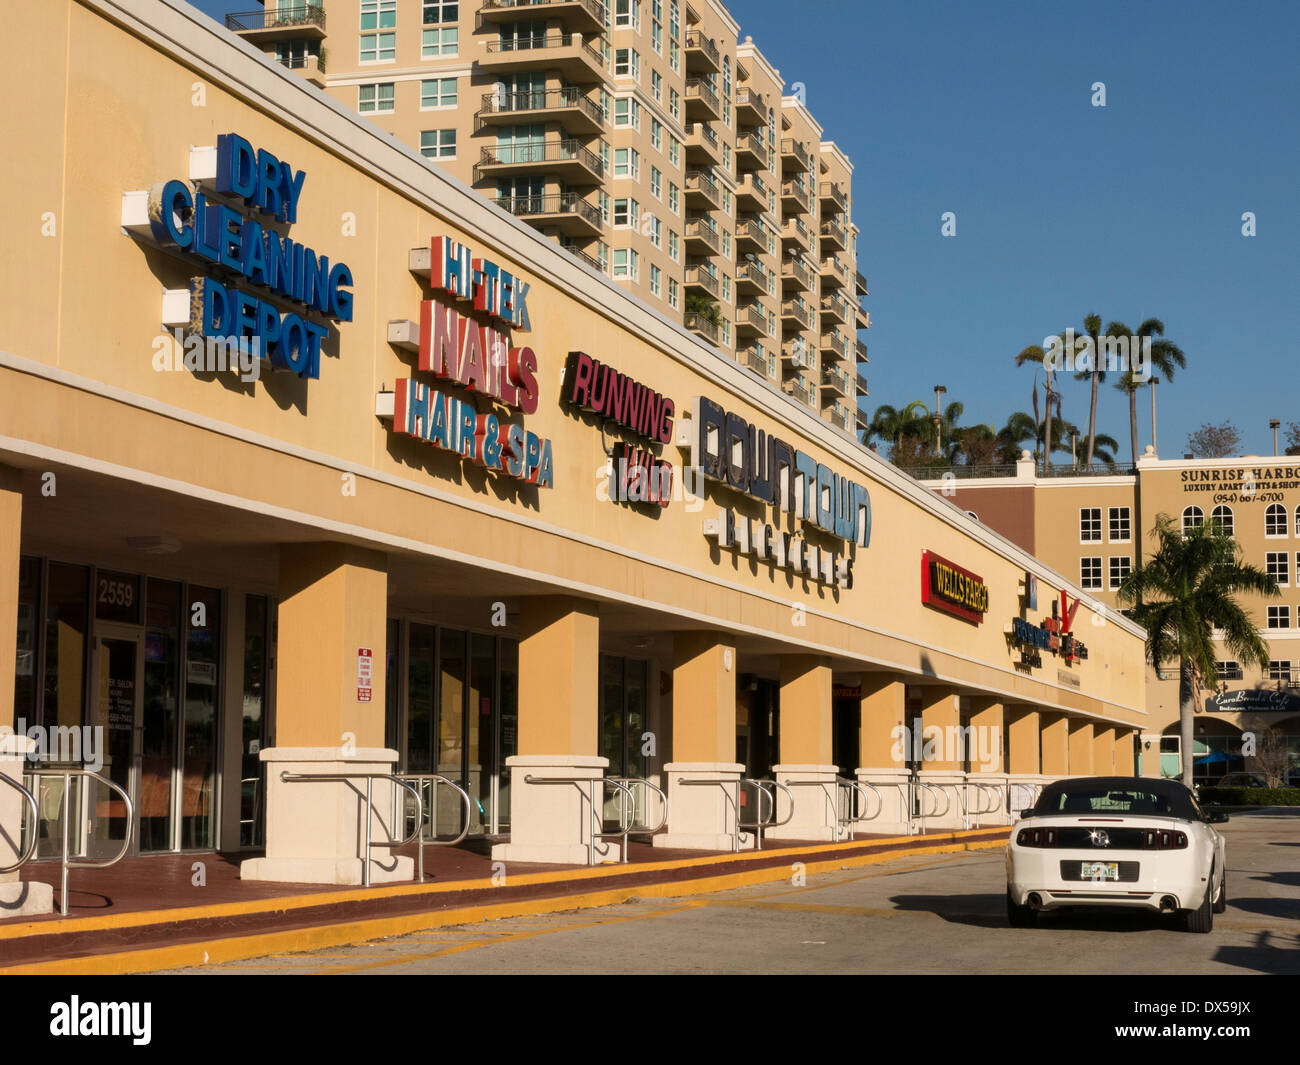 Shopping Mall in Fort Lauderdale, FL Stock Photo: 67729506 - Alamy